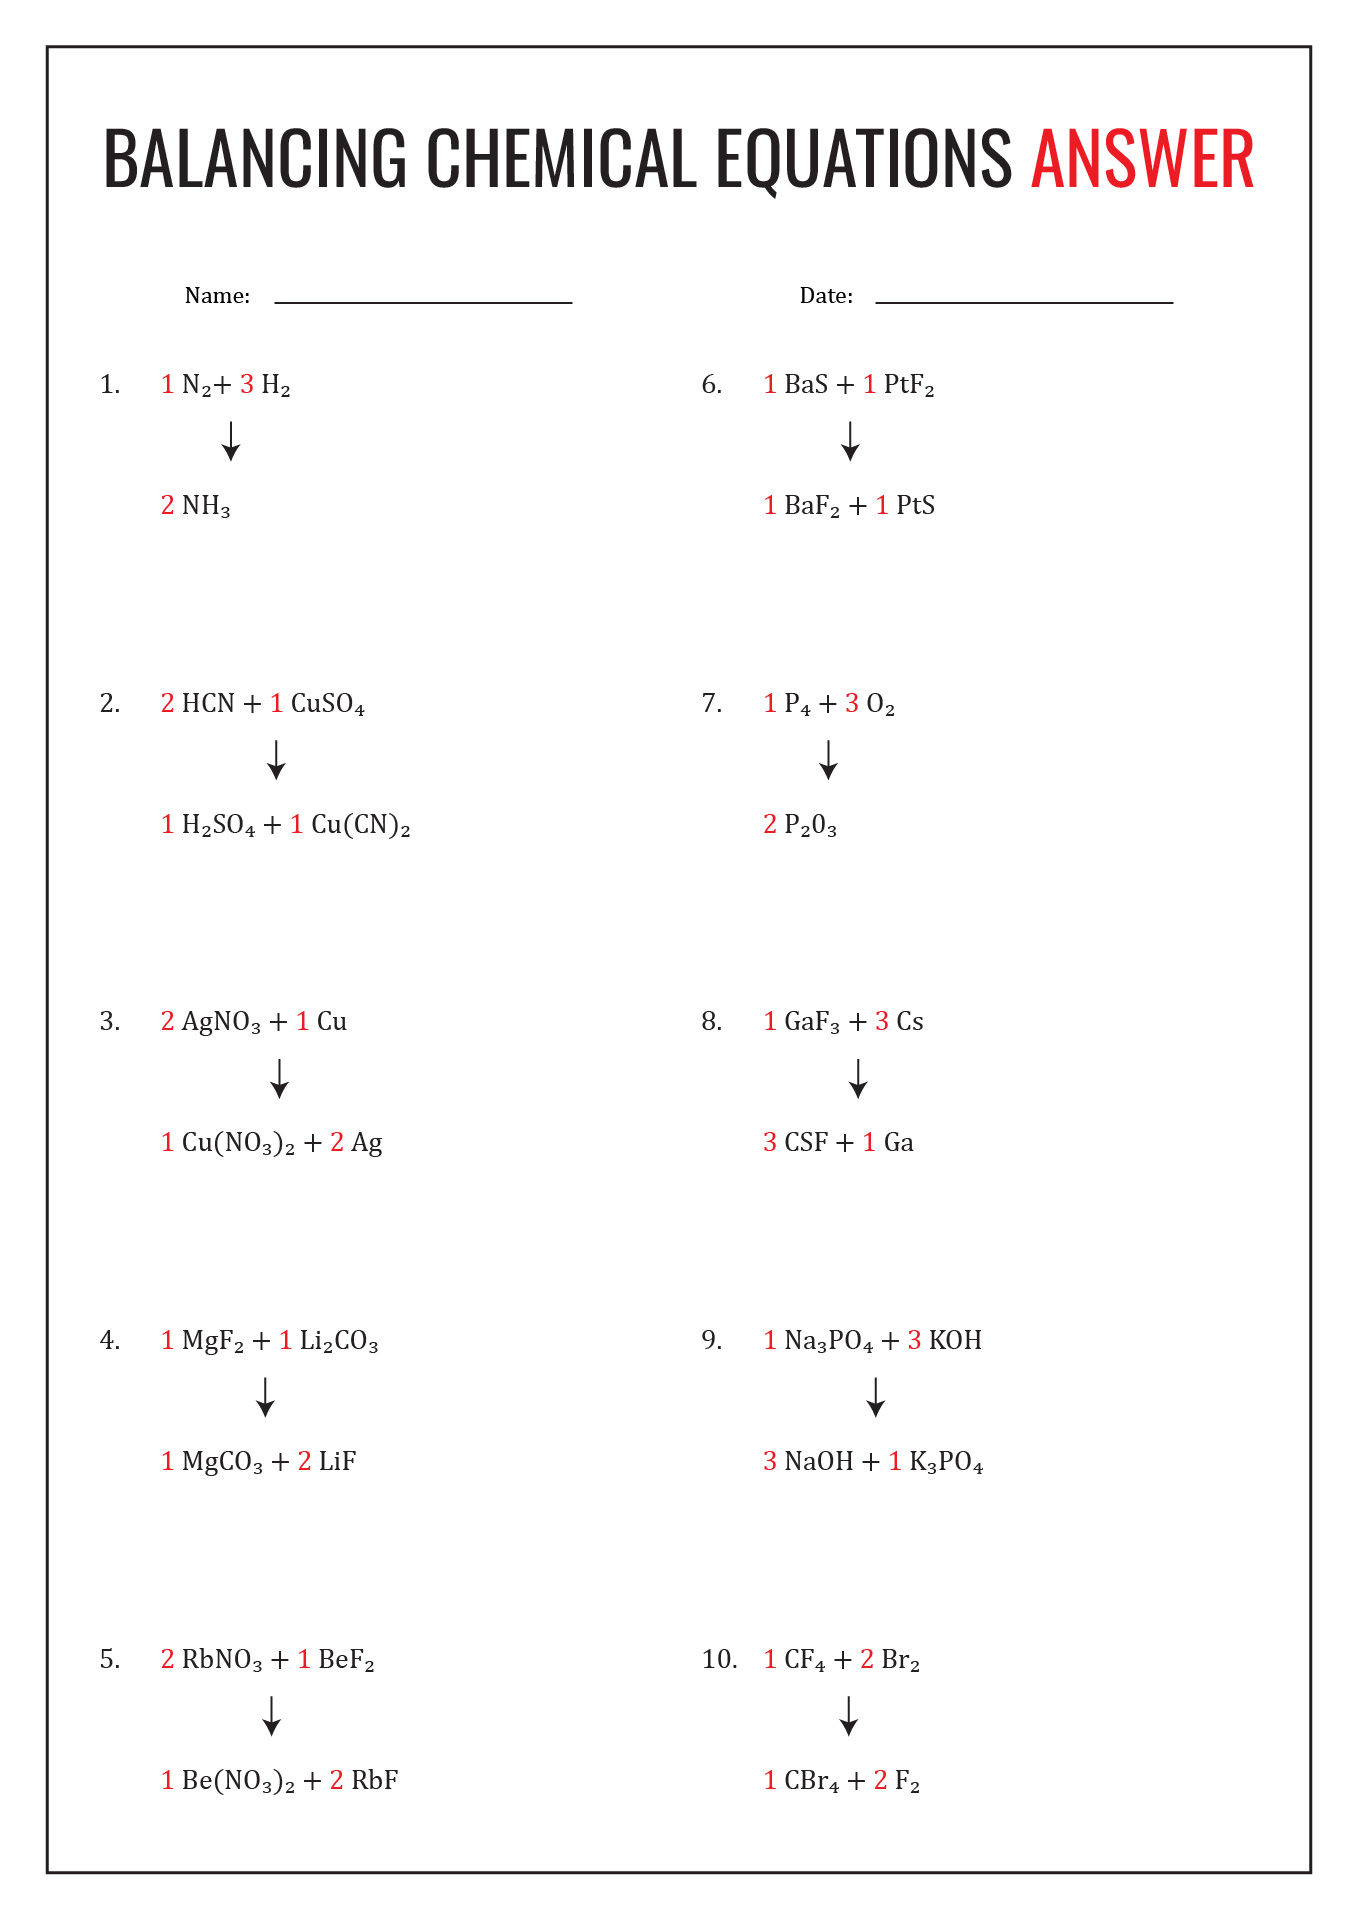 chemistry-balancing-chemical-equations-worksheet-answer-key-db-excel